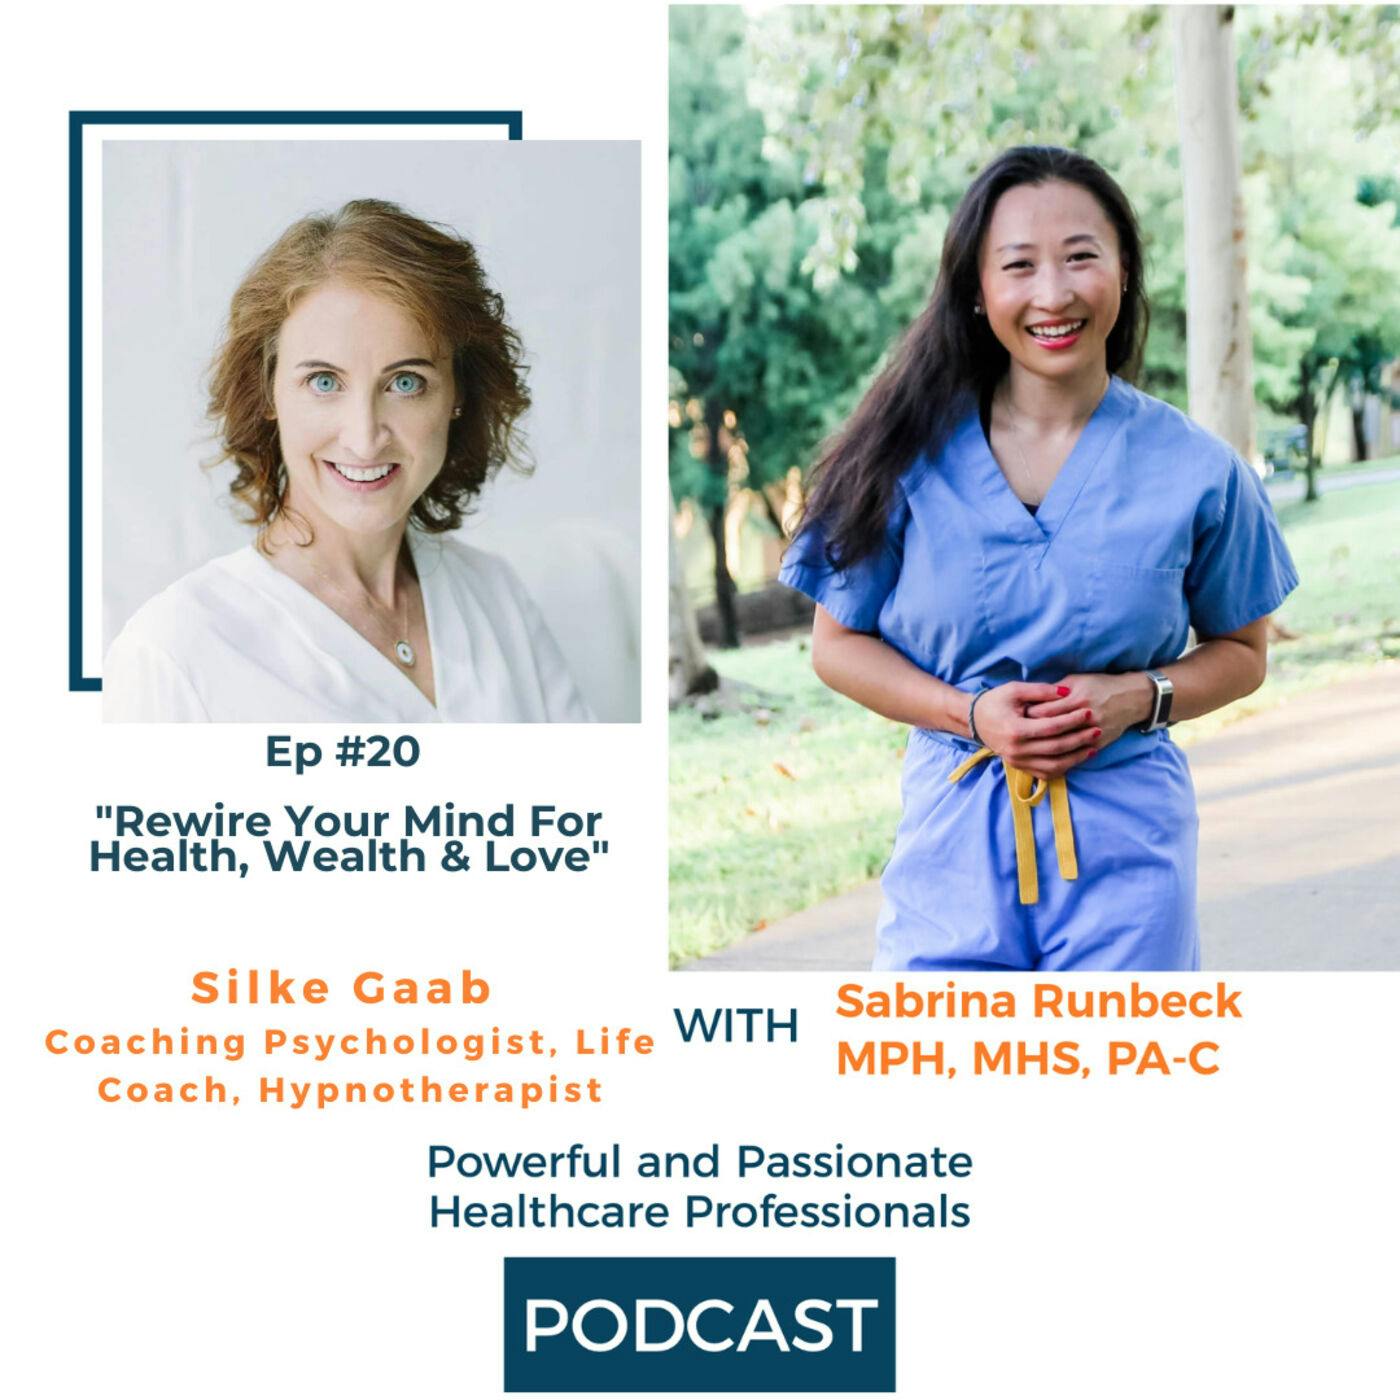 Ep 20 – Rewire Your Mind For Health, Wealth & Love with Silke Glaab